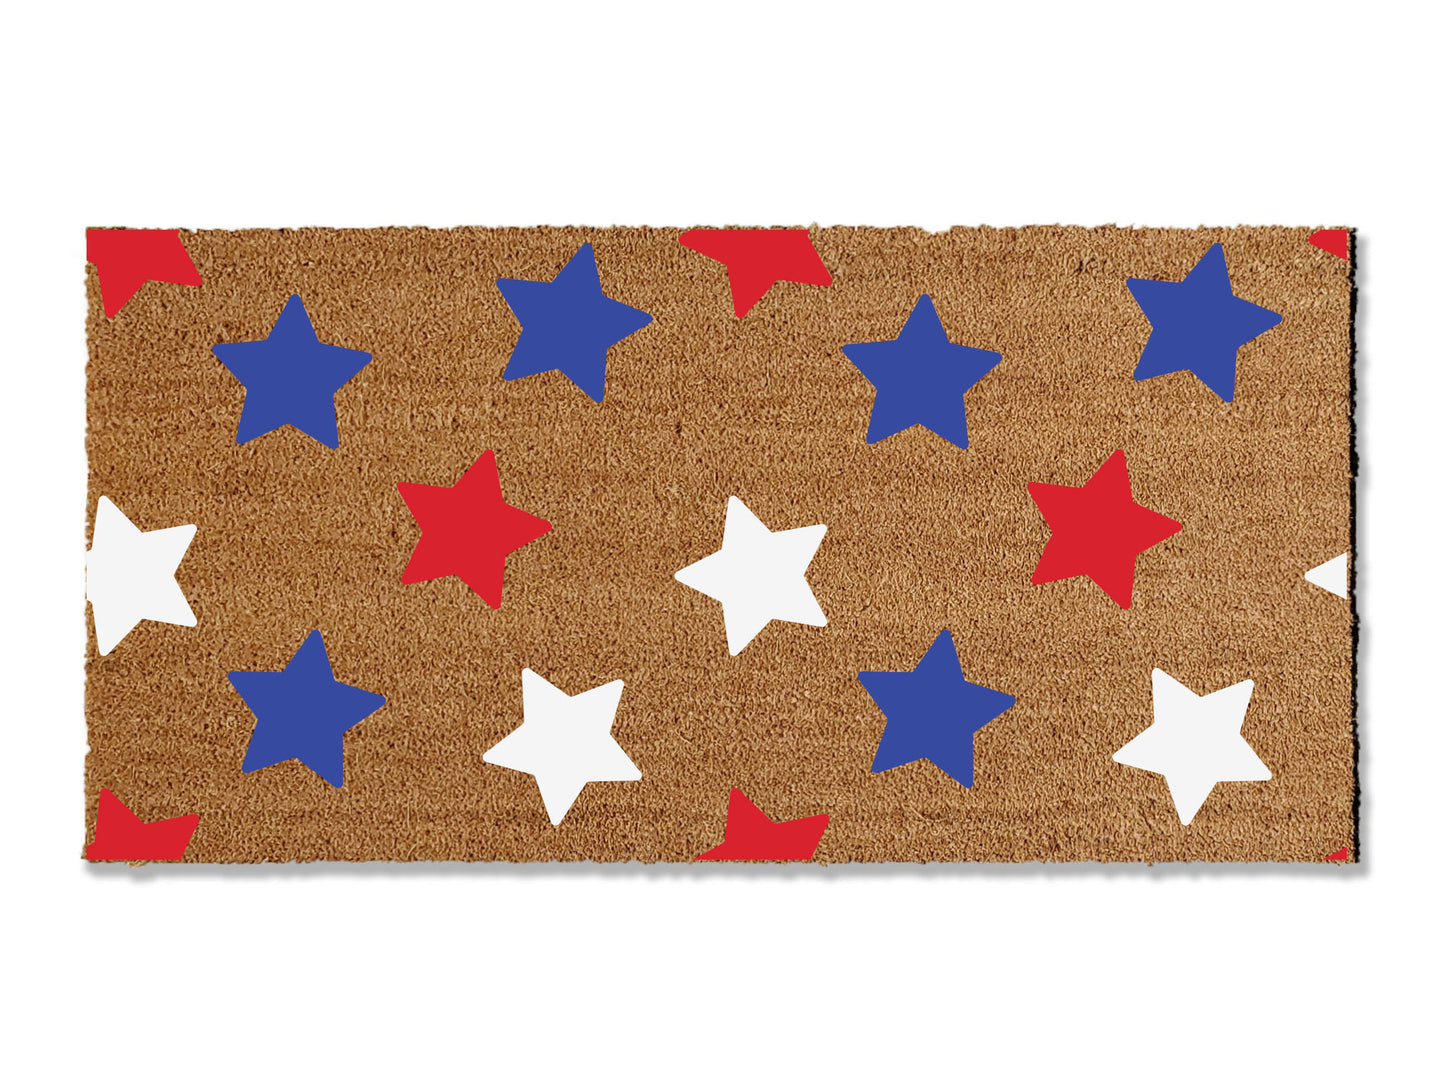 Infuse a patriotic spirit into your home with our coir doormat featuring a red, white, and blue star pattern. Ideal for a patriotic home, Memorial Day, or the 4th of July, this perfect addition to your entryway is sure to bring a smile to guests' faces. Welcome with style and national pride using this vibrant and festive coir doormat.